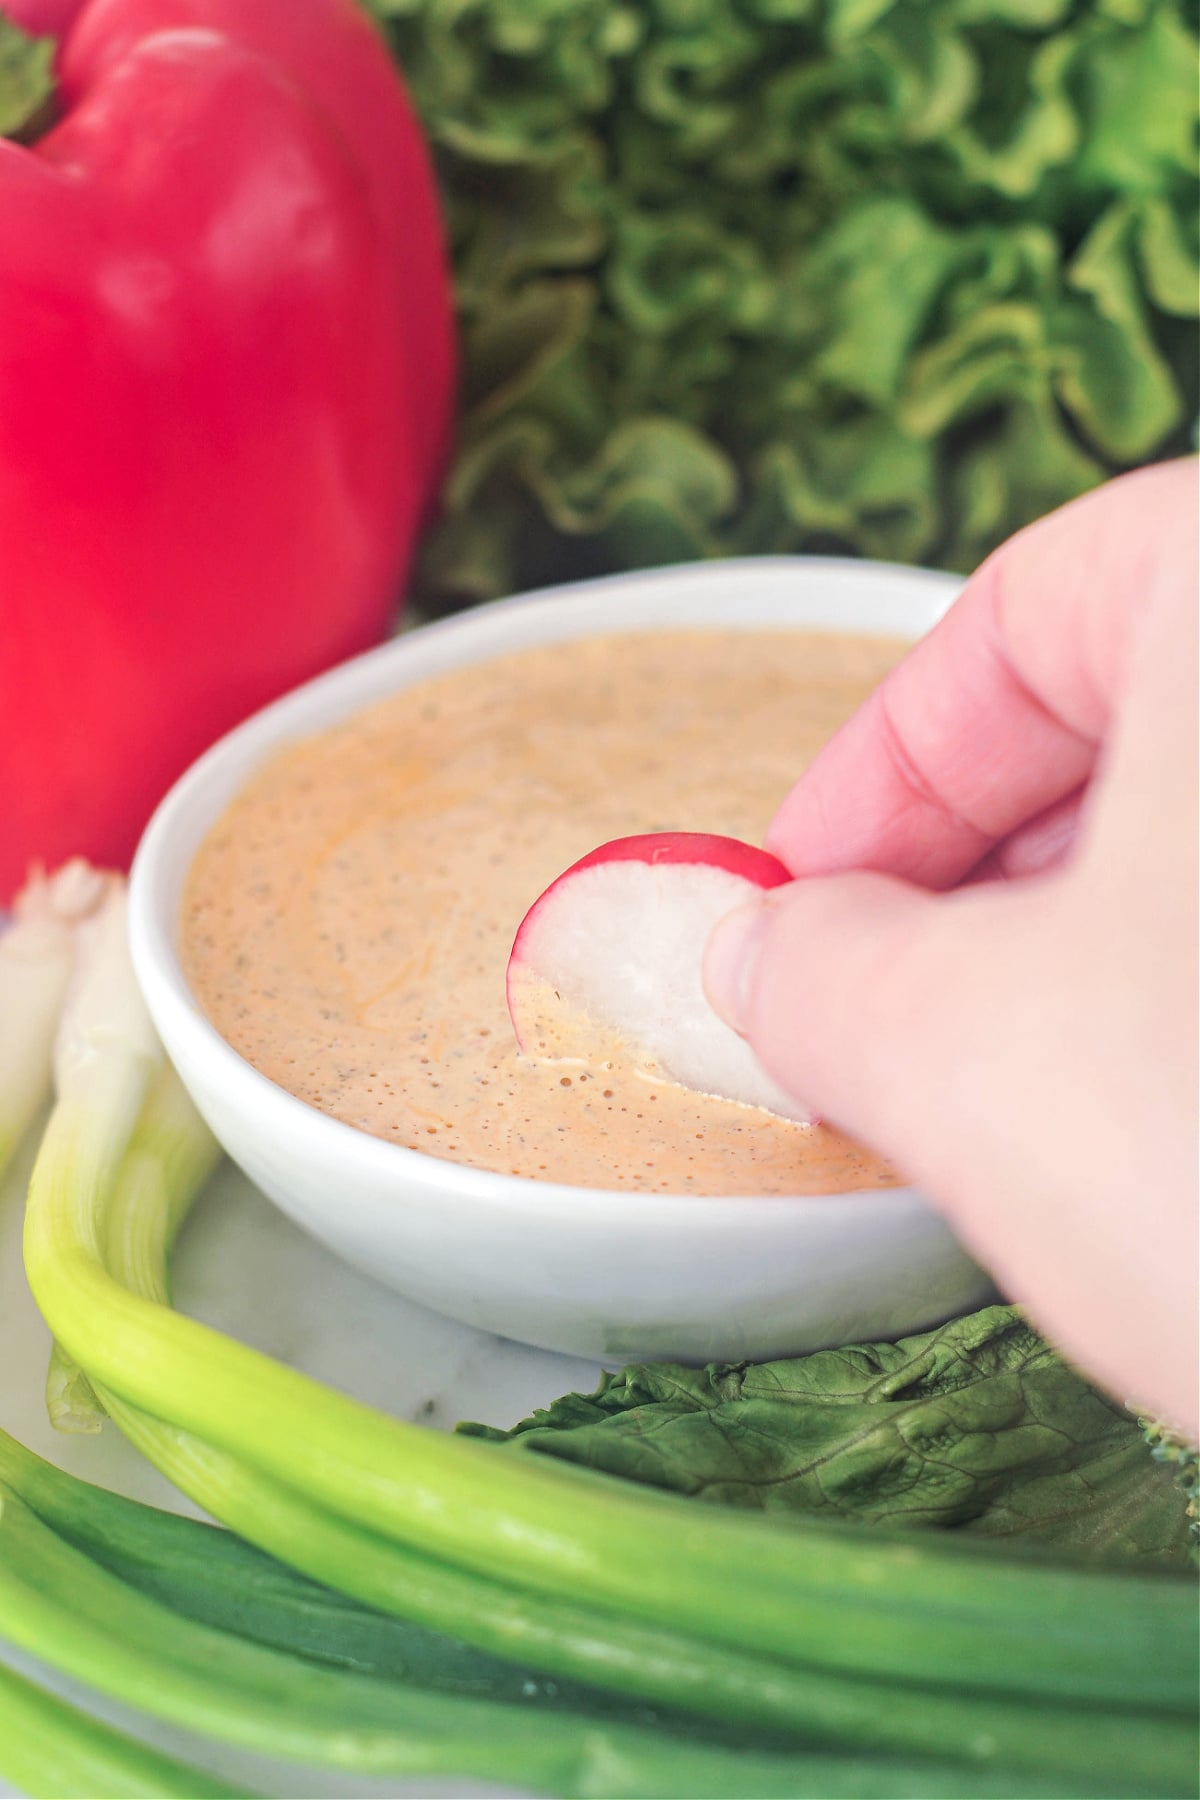 a hand dipping a coin of red and white radish into an orange colored chipotle ranch dressing in a small white ceramic bowl. bowl is surrounded by colorful veggies: bright red pepper, curly green lettuce, and green onions.